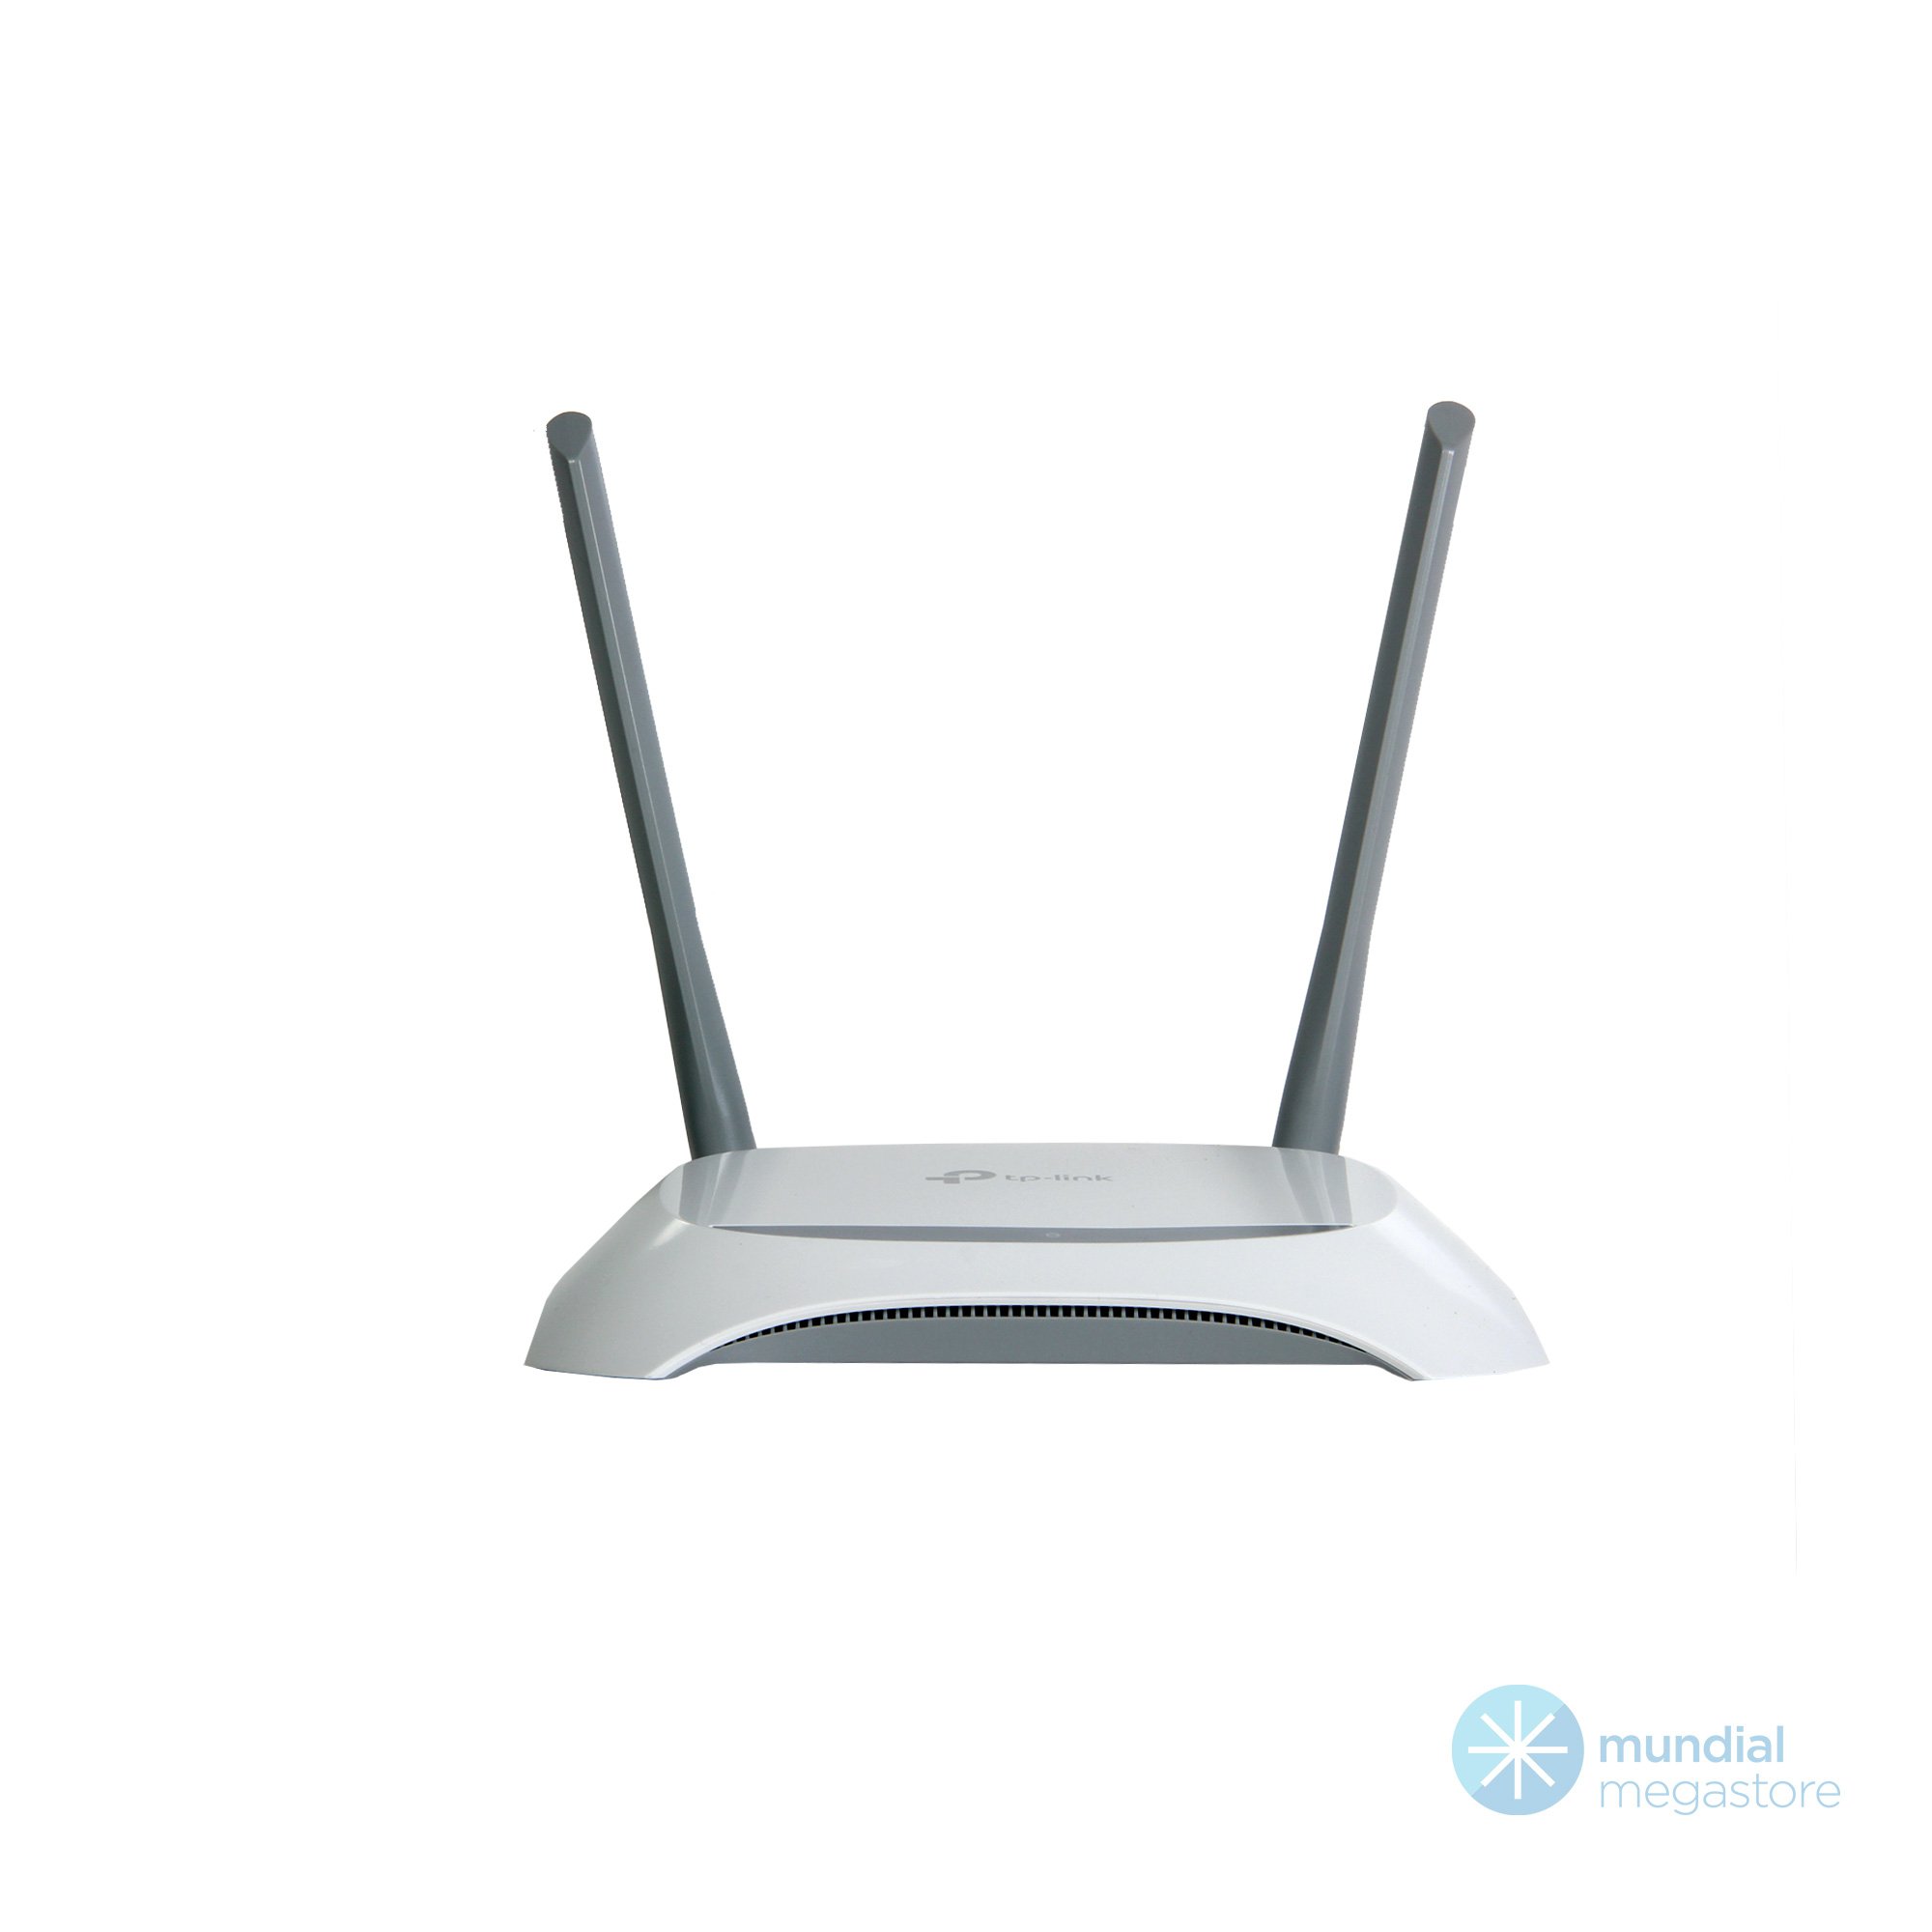 wireless roteador tp link wr849n 300mbps 2 antenas 45885 2000 195983